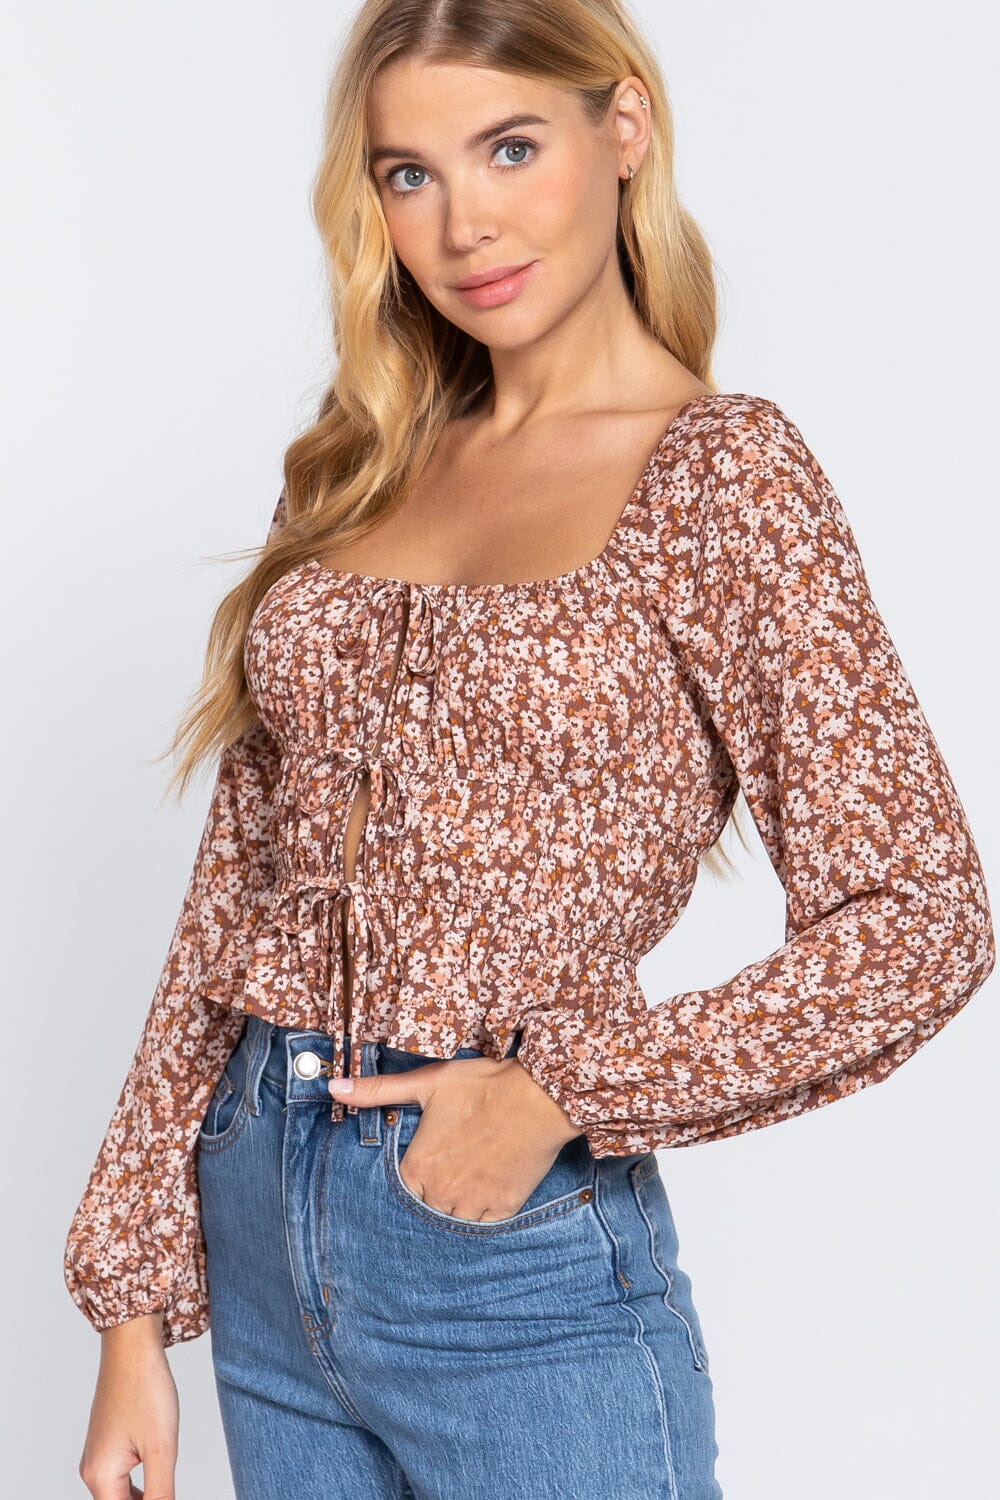 Mauve Brown Floral Casual Boho Square Neck Long Sleeve Front Shirring Ribbon Tie Woven Top Shirts & Tops jehouze 